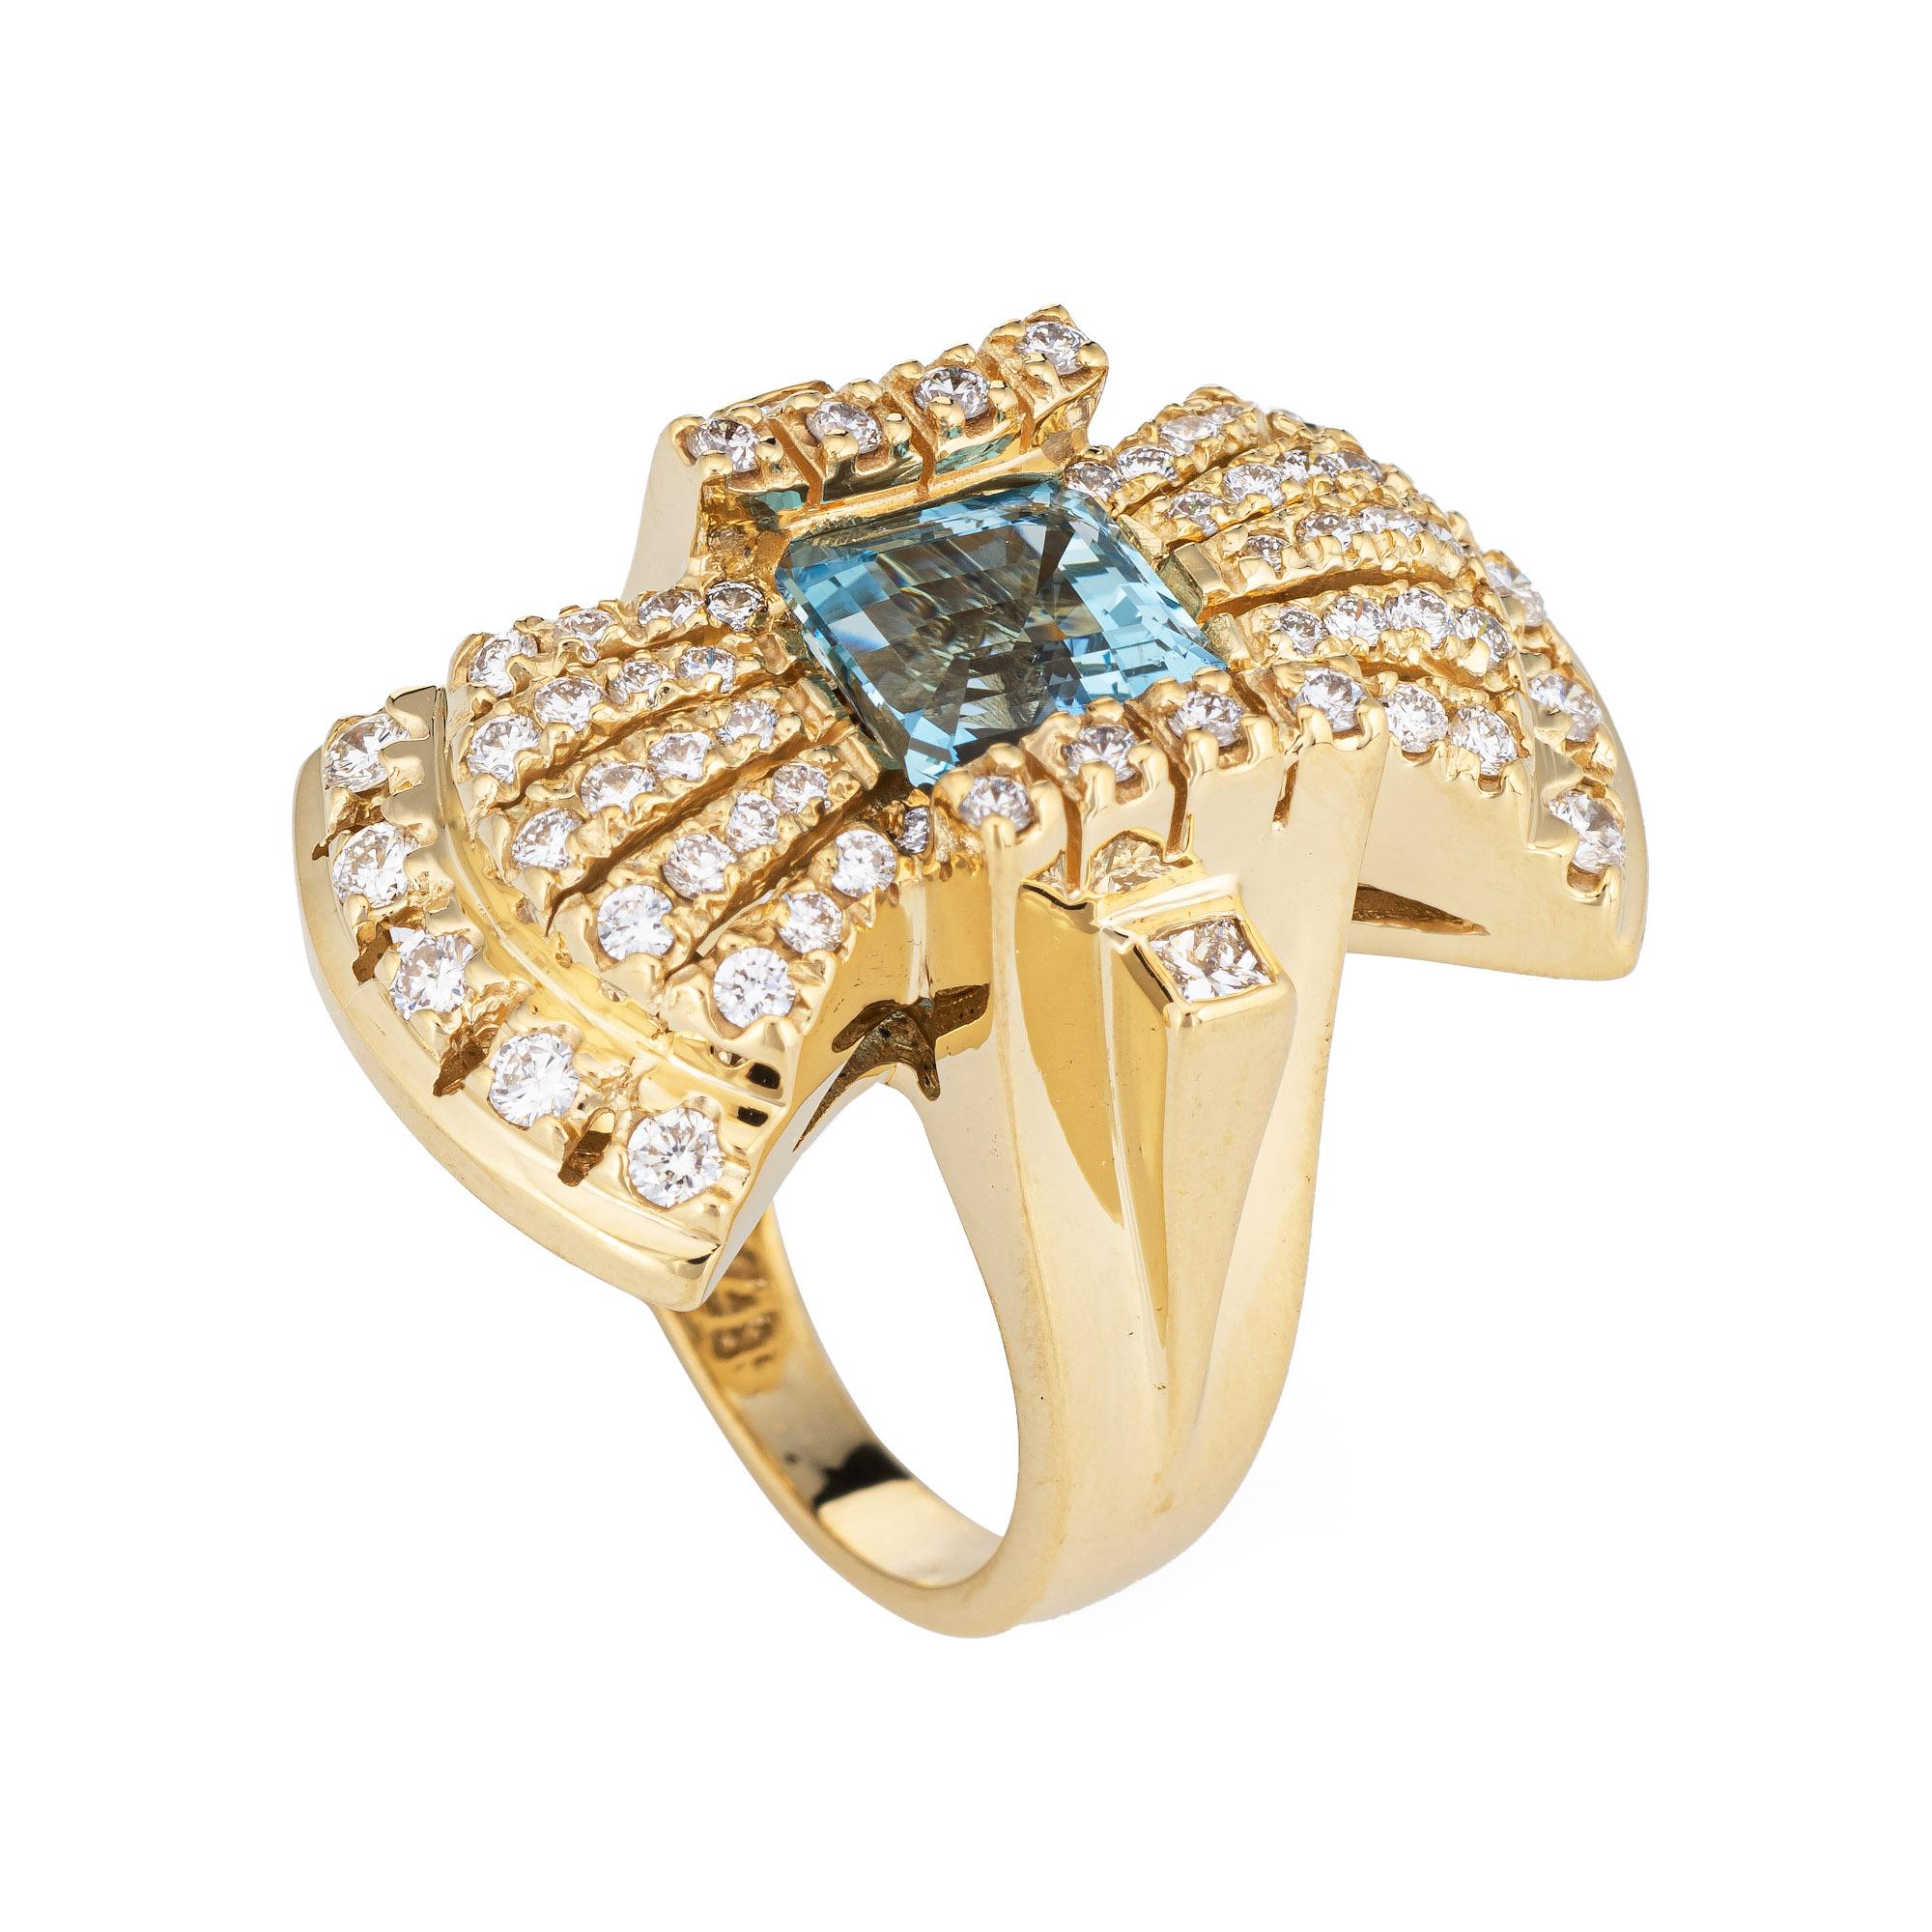 Stylish aquamarine & diamond cocktail ring (circa 2000s) crafted in 18 karat yellow gold. 

Emerald cut aquamarine measures 8mm x 7mm (estimated at 2.30 carats), accented with 60 round brilliant cut diamonds totaling an estimated 1.25 carats